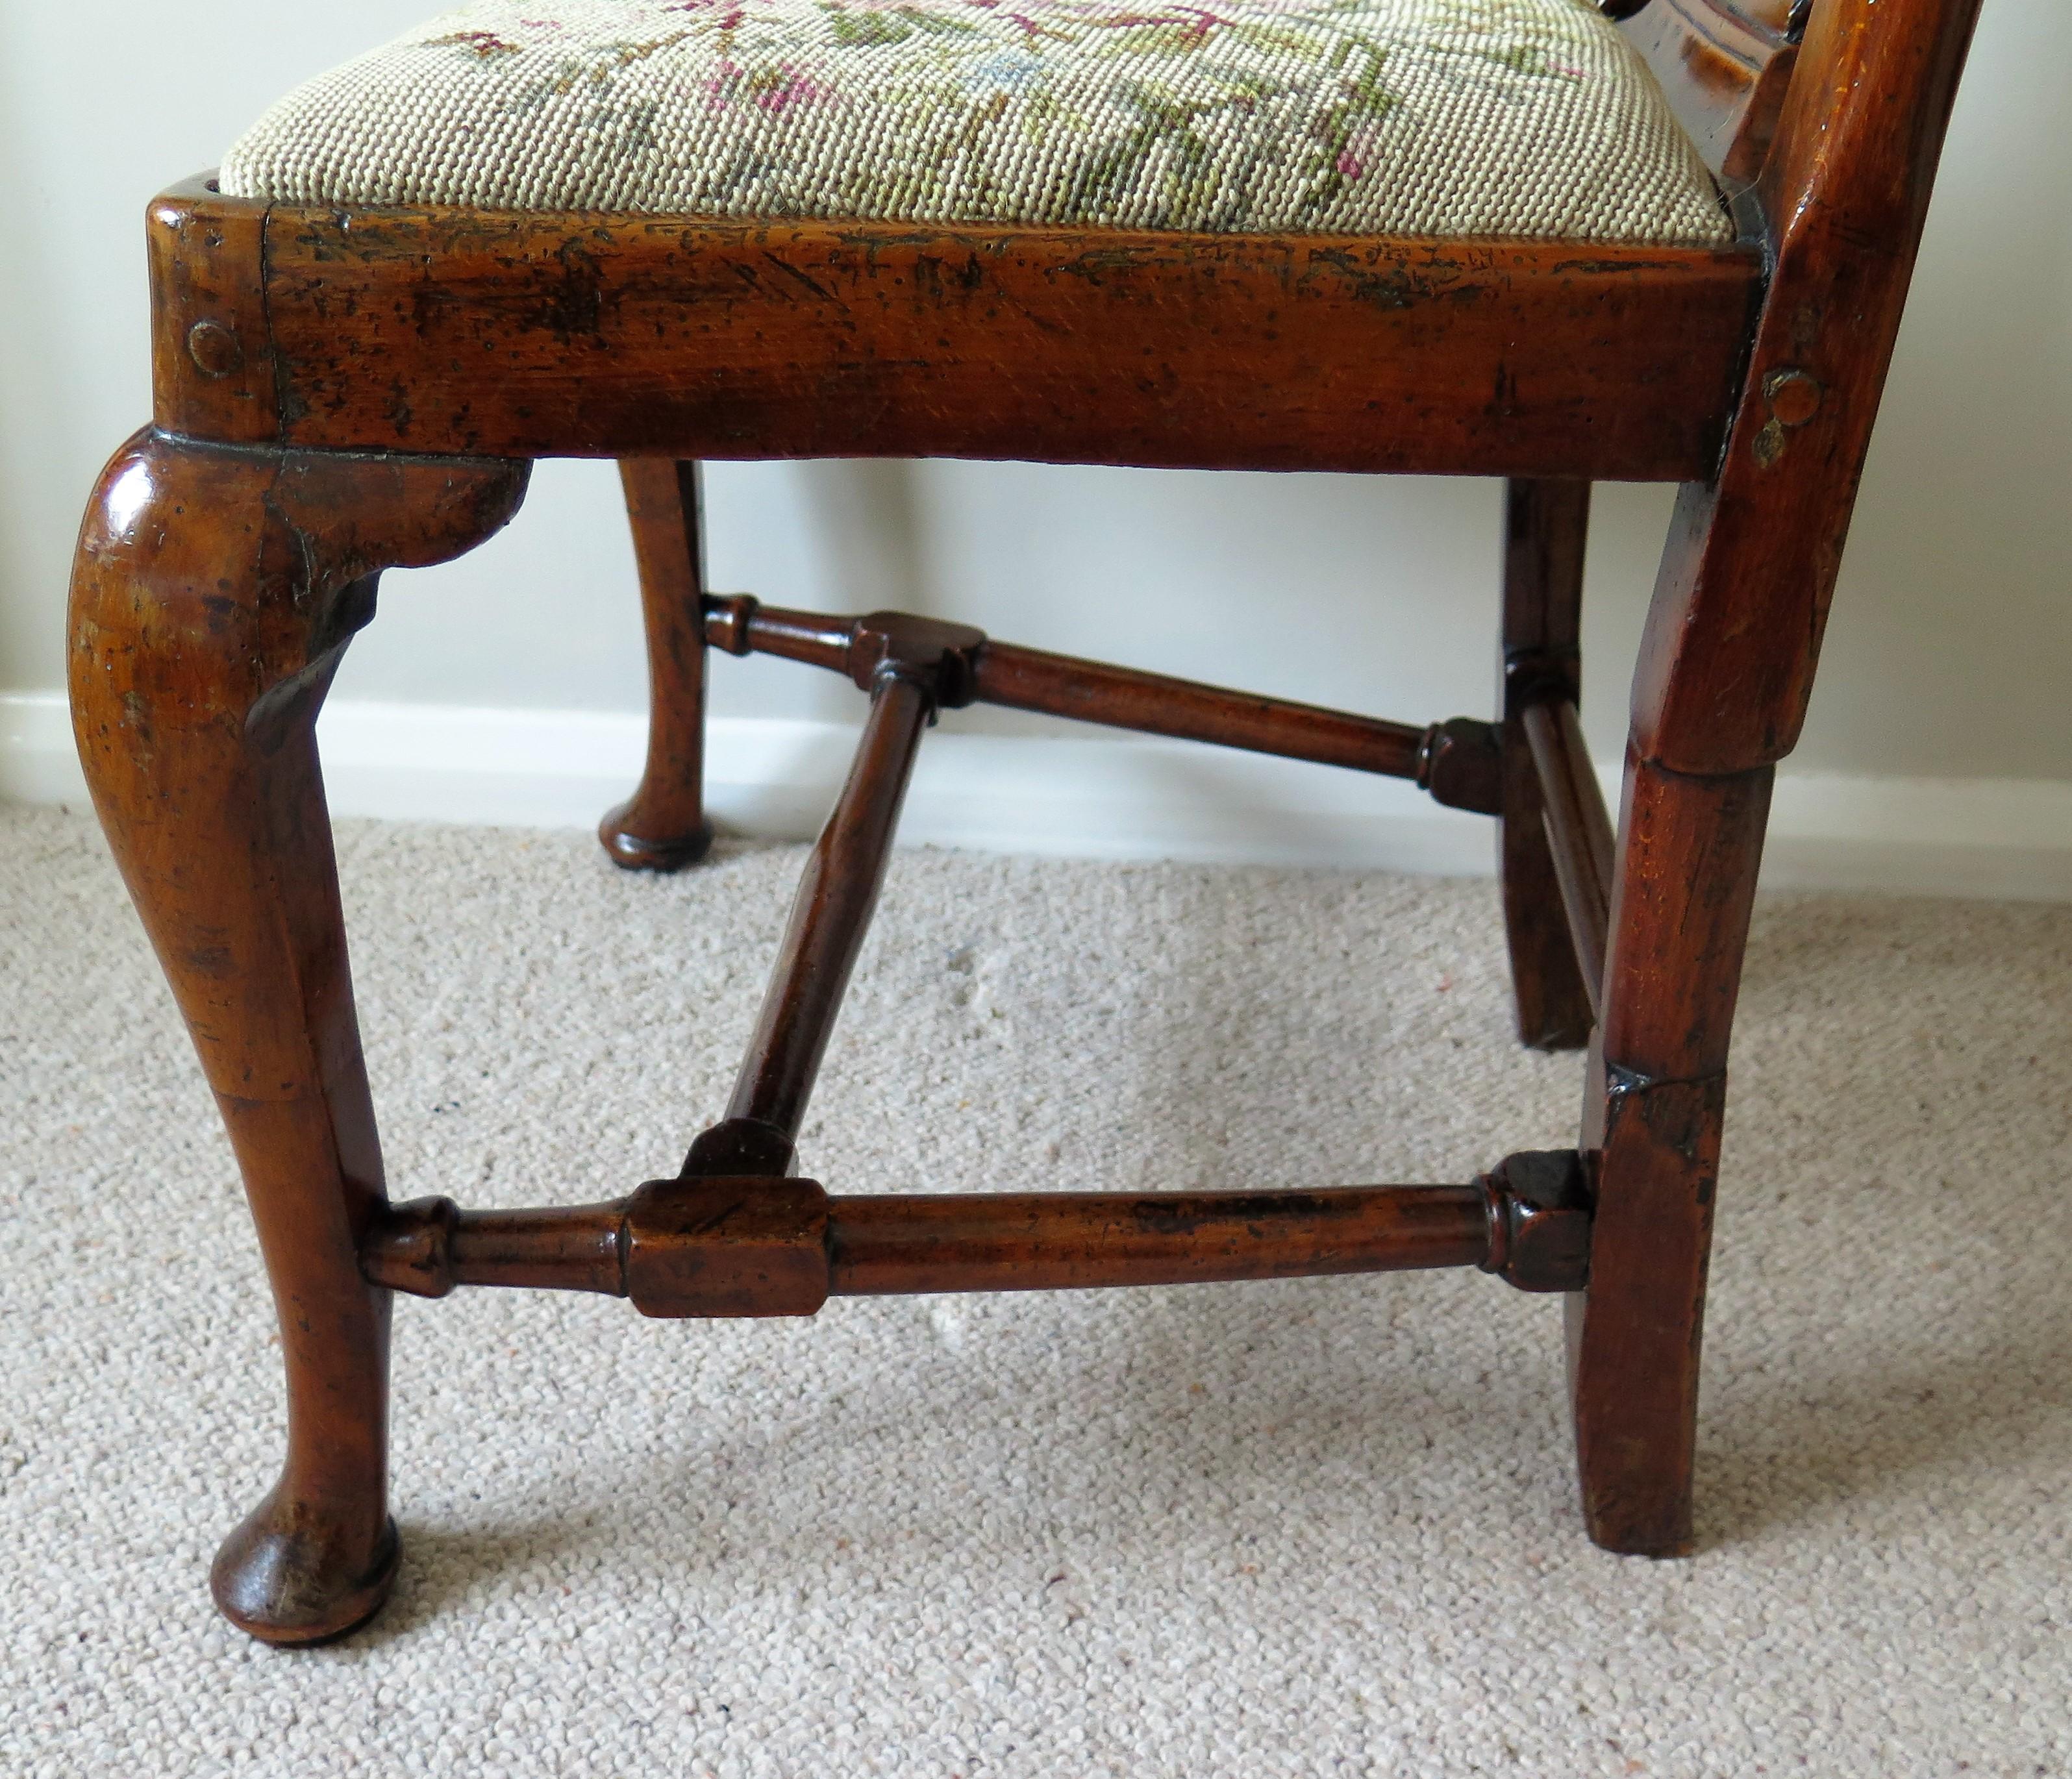 Hand-Carved Queen Anne Period Walnut Chair Cabriole Legs and Stretchers, English circa 1700 For Sale